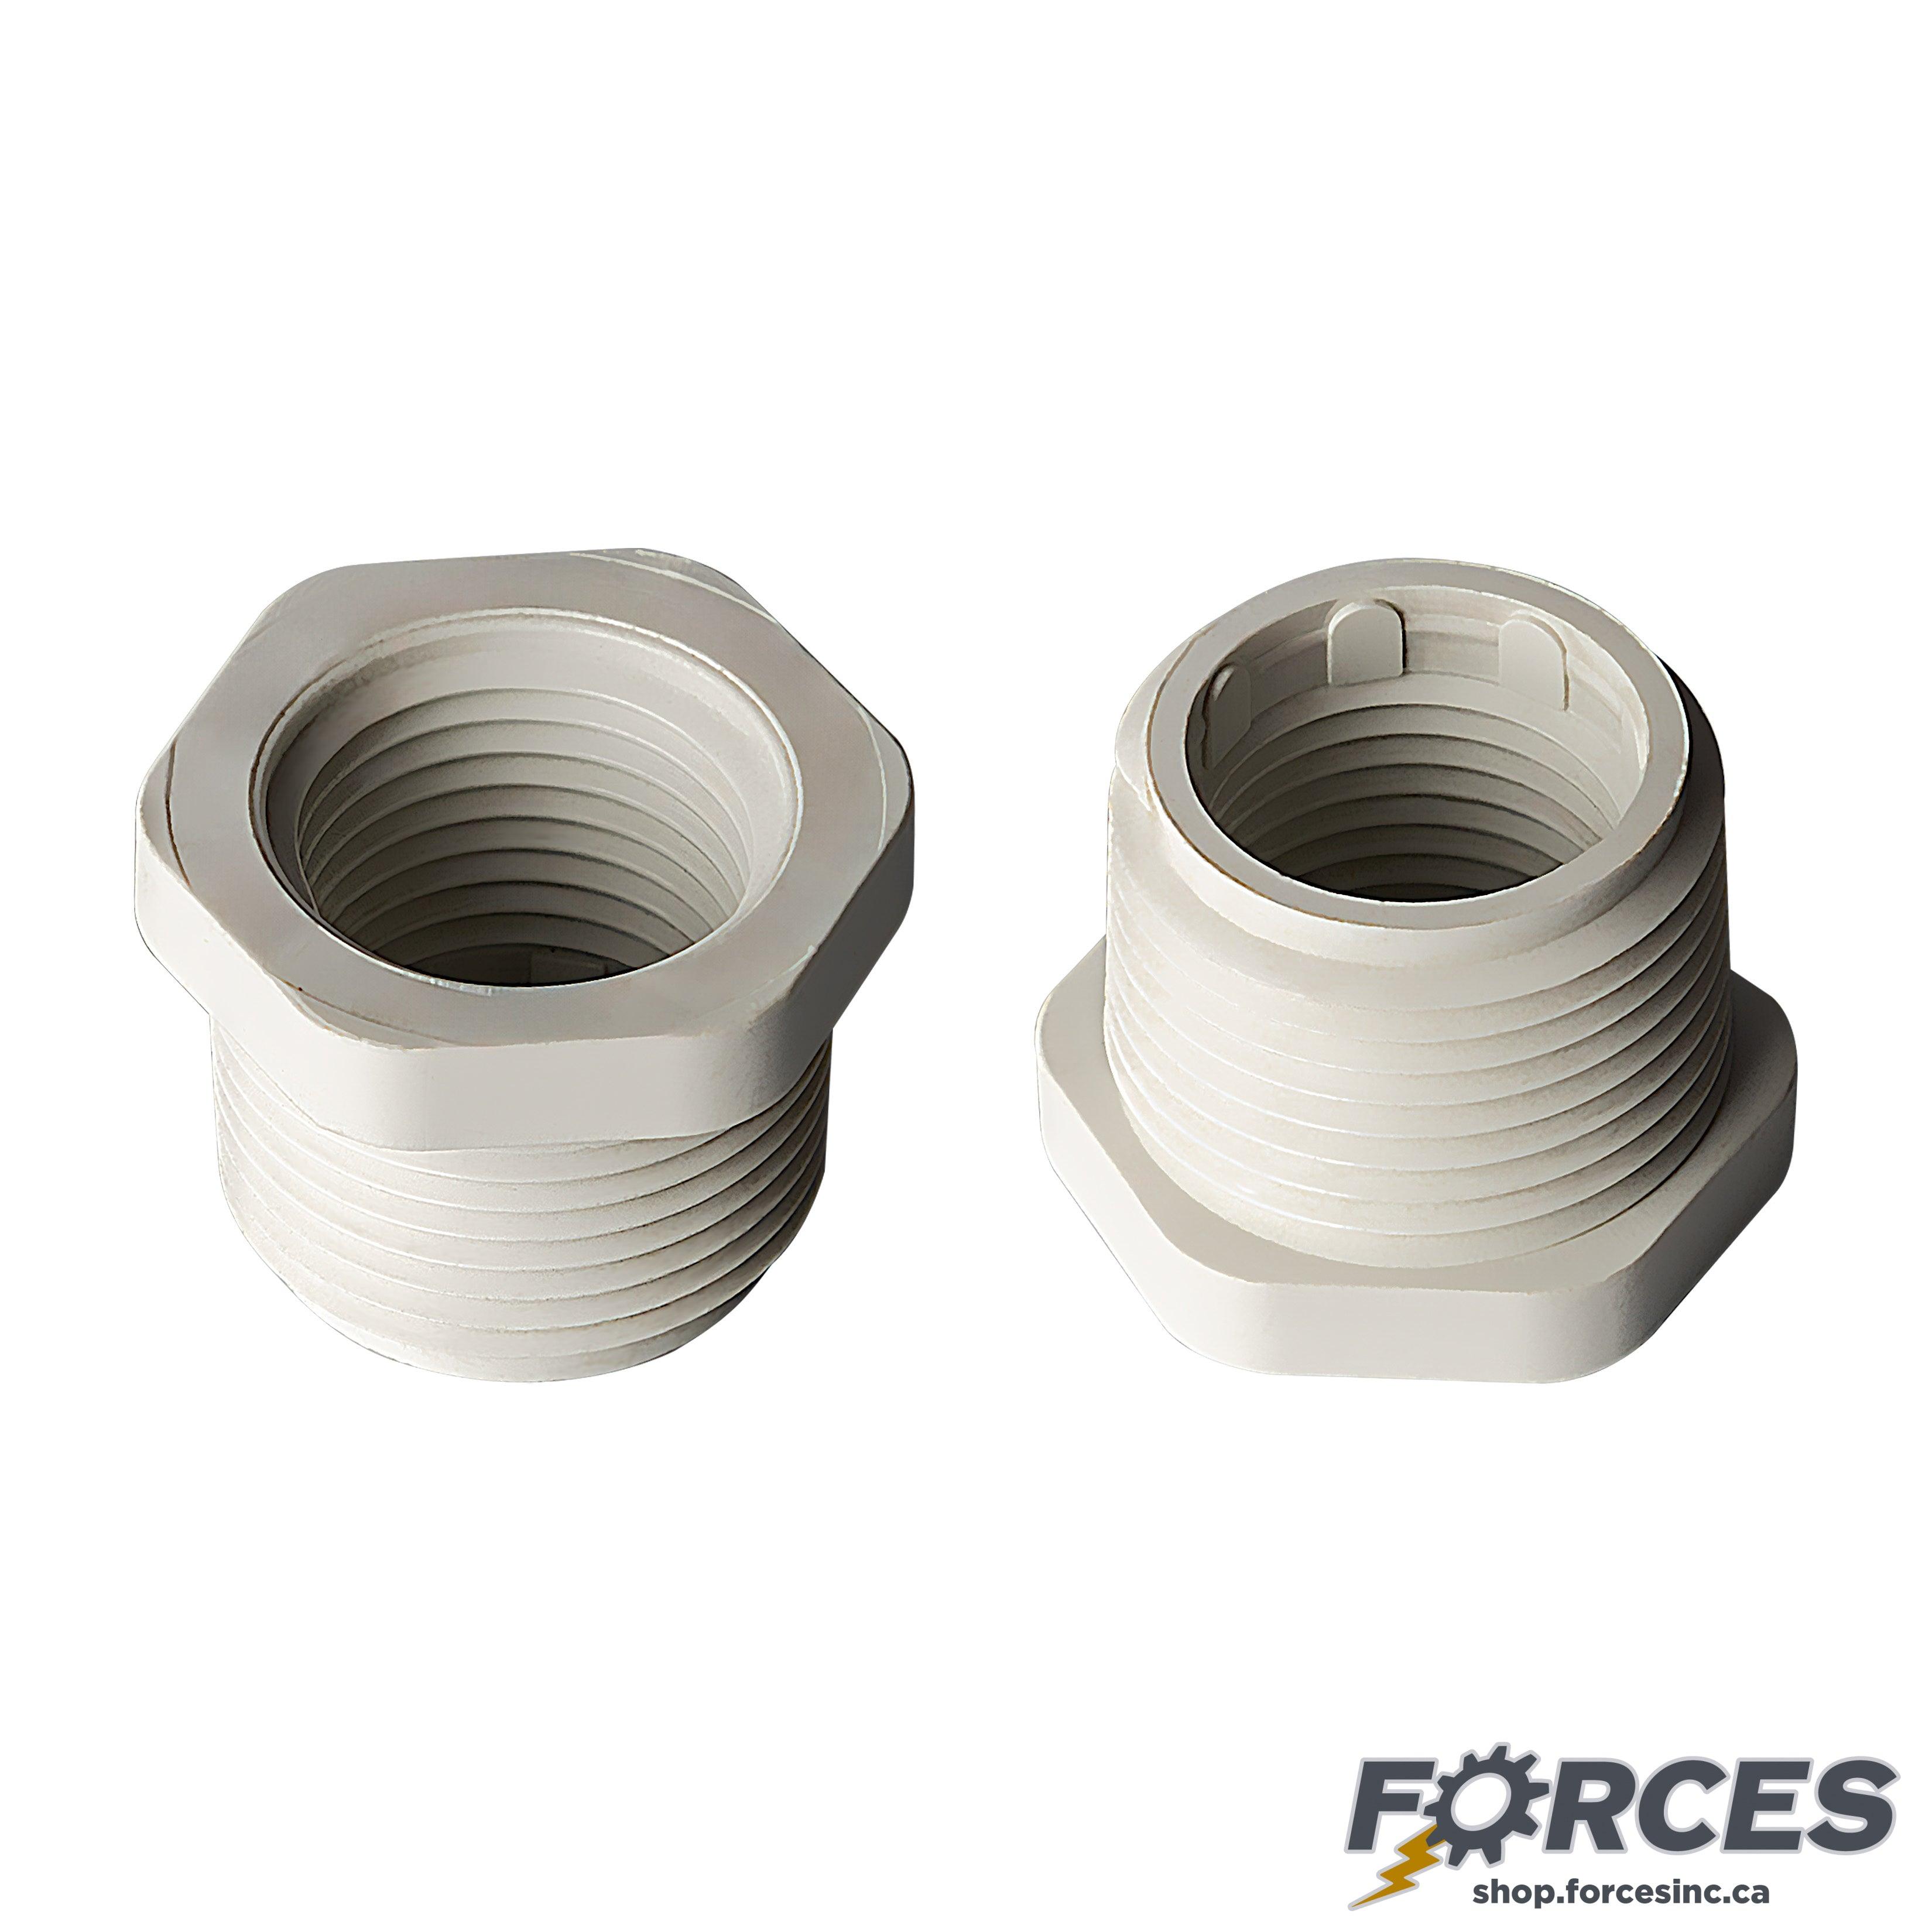 1-1/2" x 1/2" Reducer Bushing (MPT x FPT) Sch 40 - PVC white | 439209W - Forces Inc